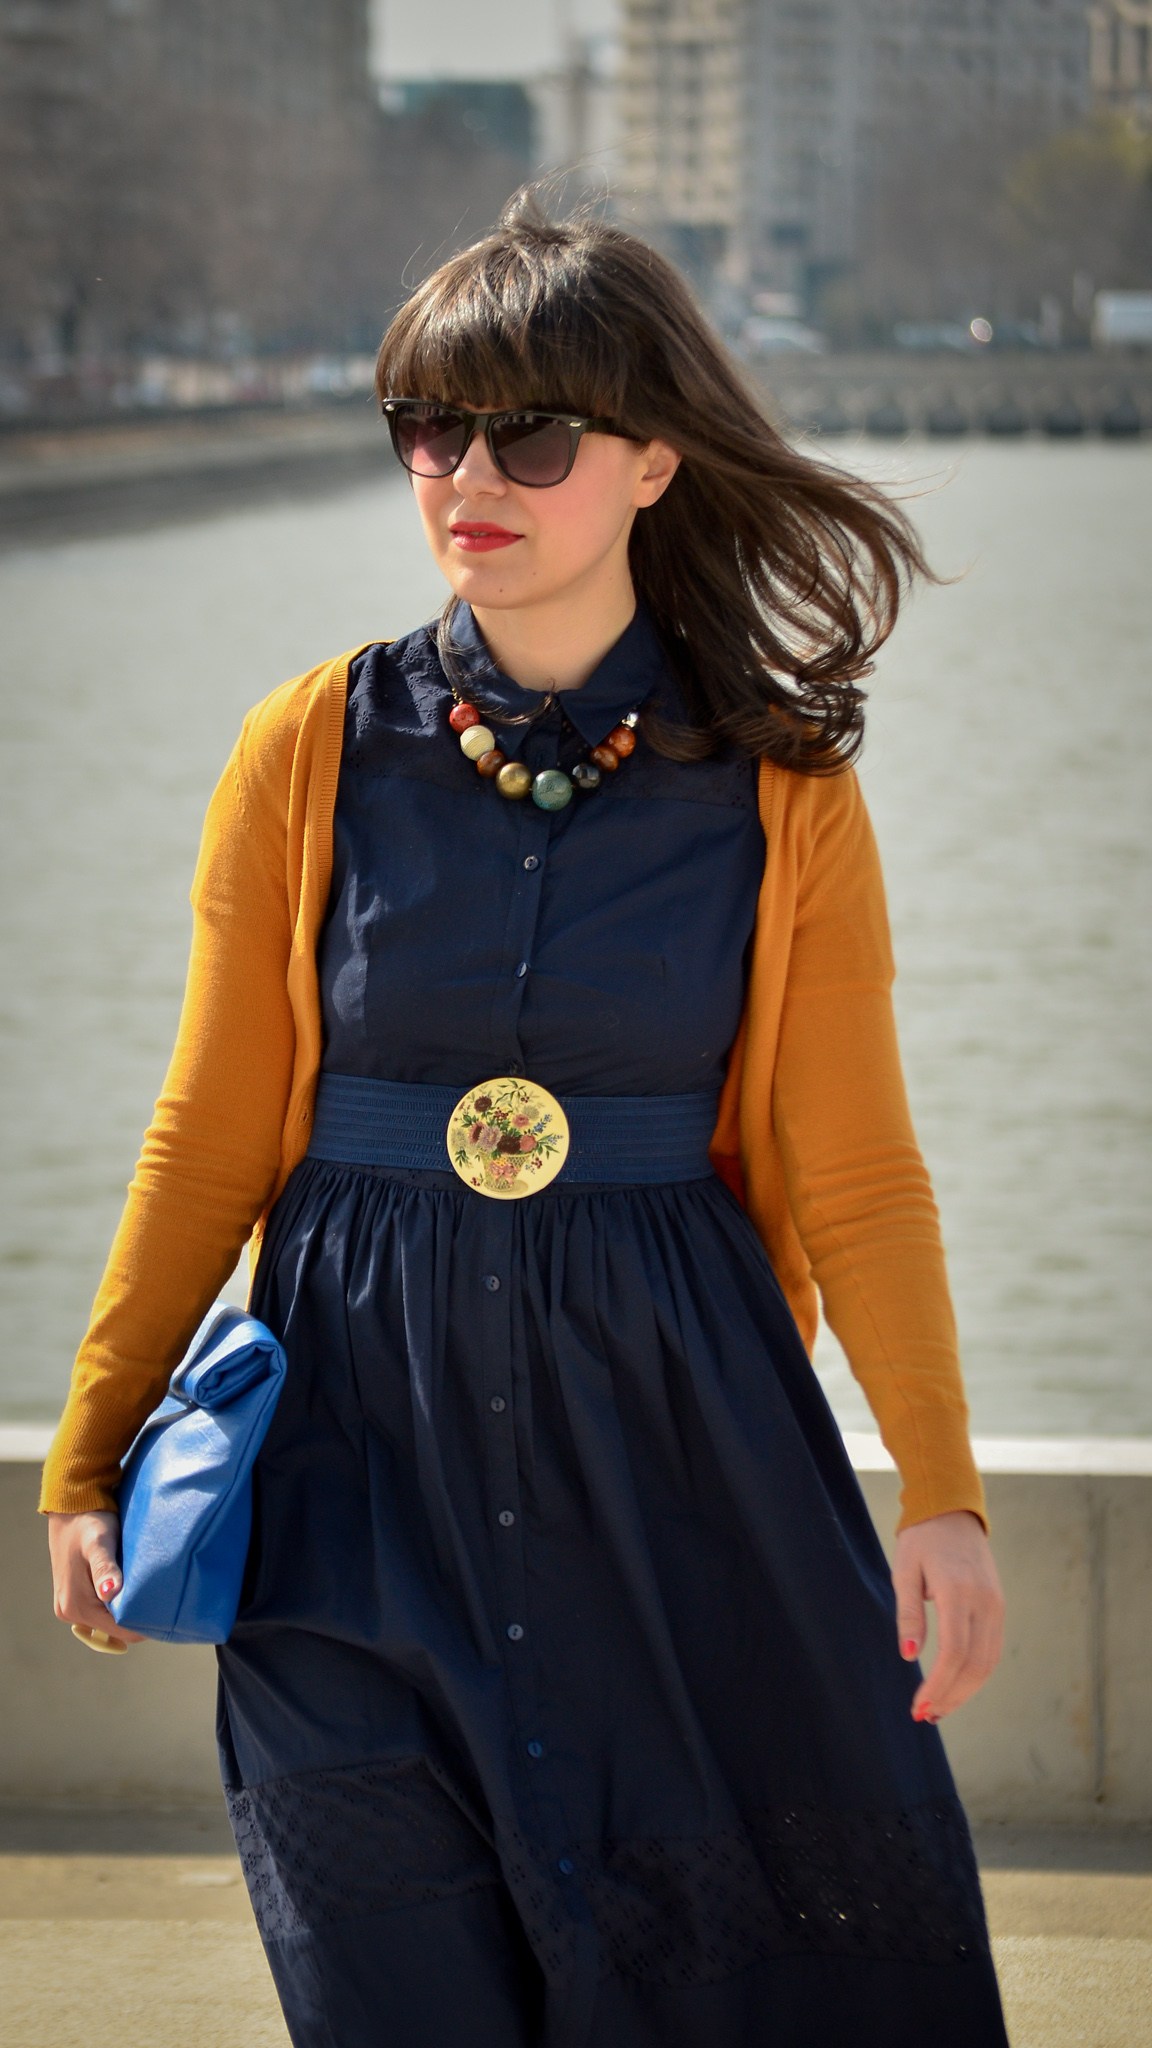 spring outfit navy dress 50s style mustard cardigan c&a thrifted belt cobalt blue clutch new yorker poema mustard heels 